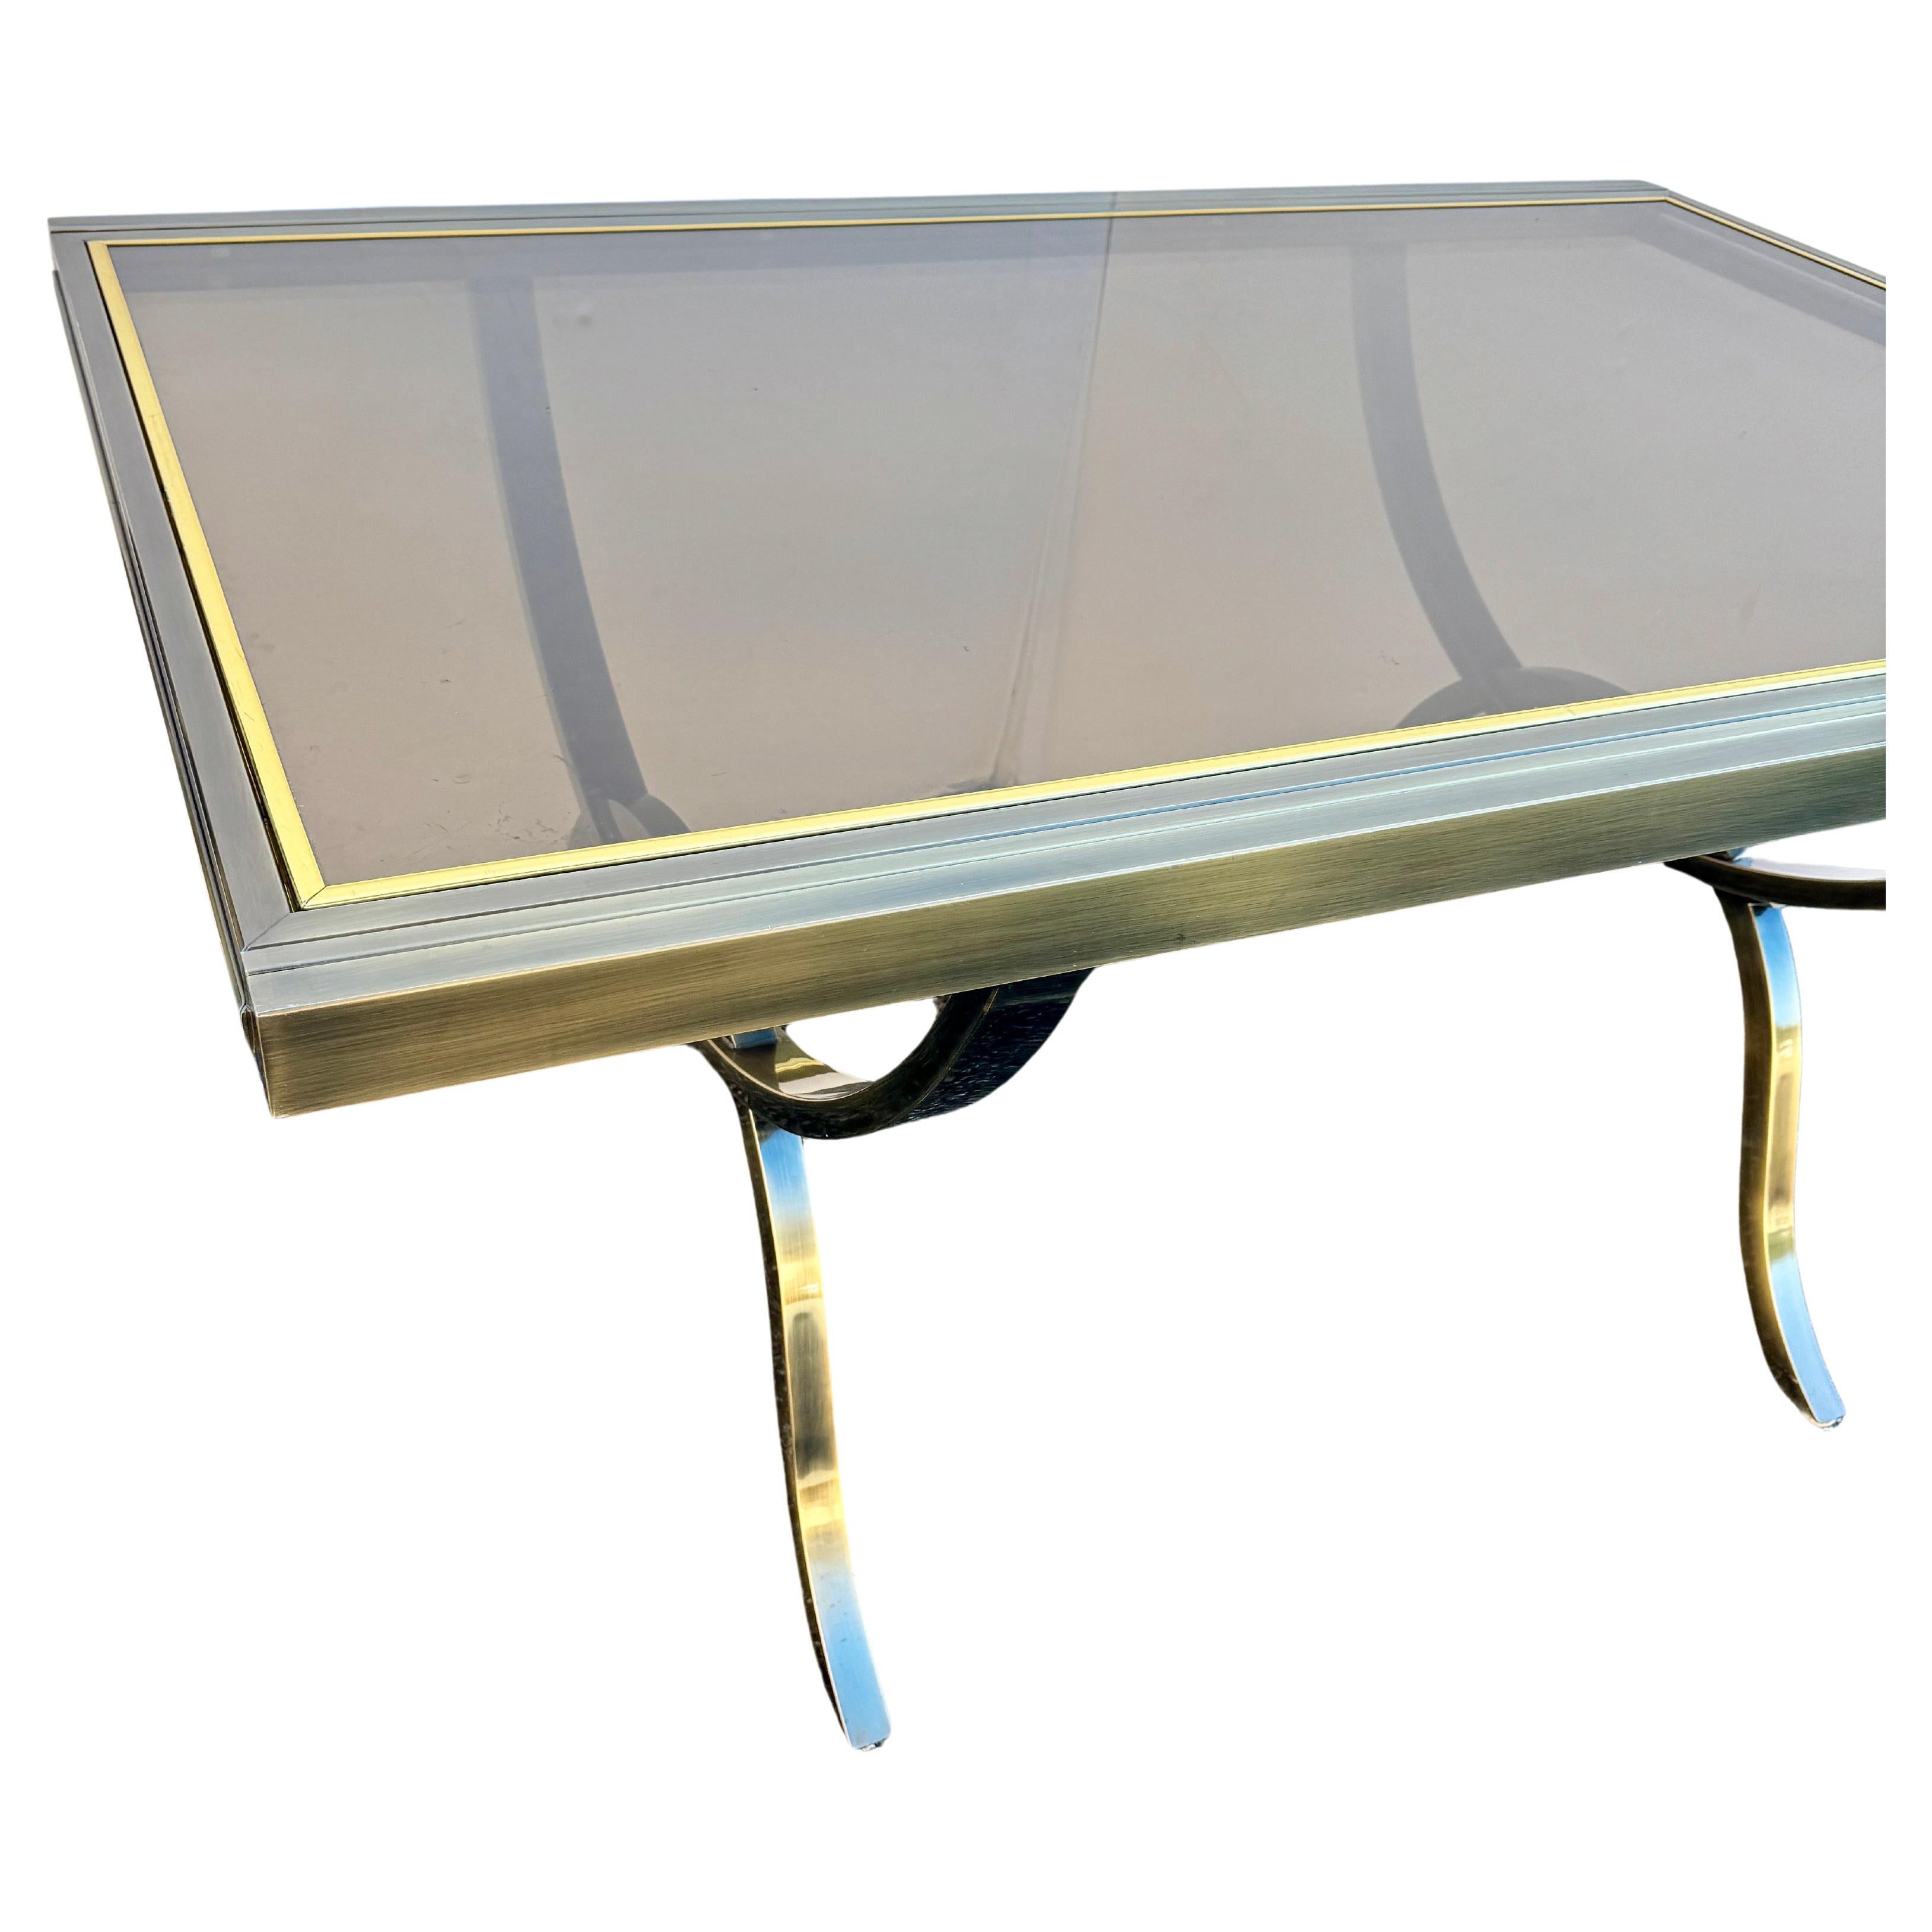 Fantastic Mid-Century Modern extendable chrome, brass and smoked glass curule legs dining table designed by Milo Baughman for the Design Institute of America. The table easily expands with built-in leaves that double the width of the table (extends